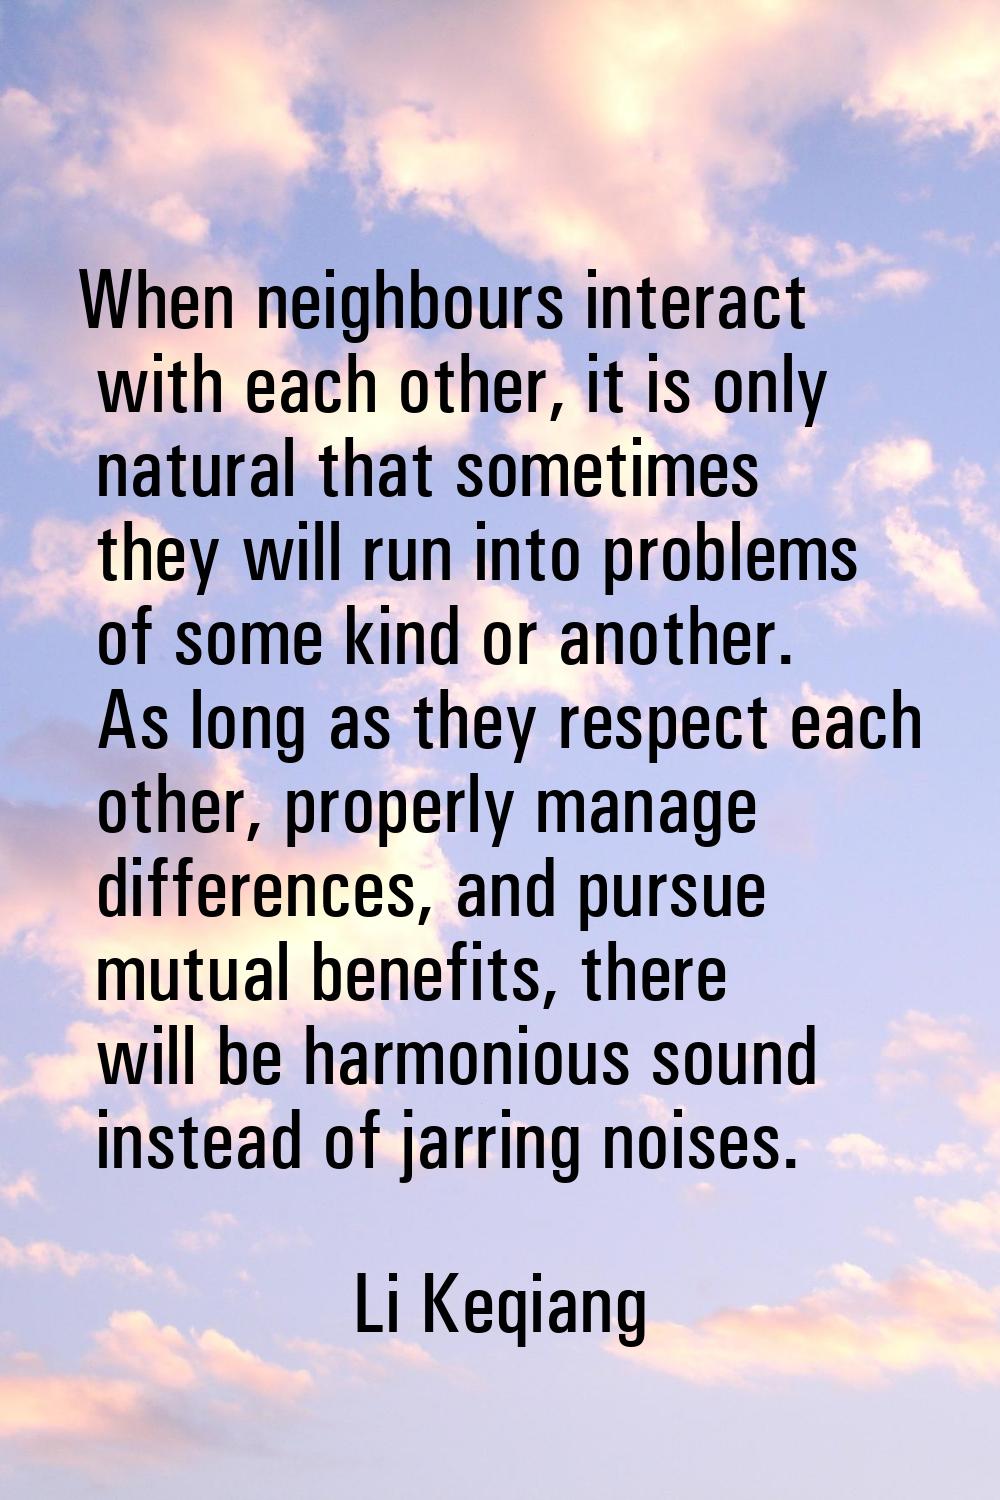 When neighbours interact with each other, it is only natural that sometimes they will run into prob